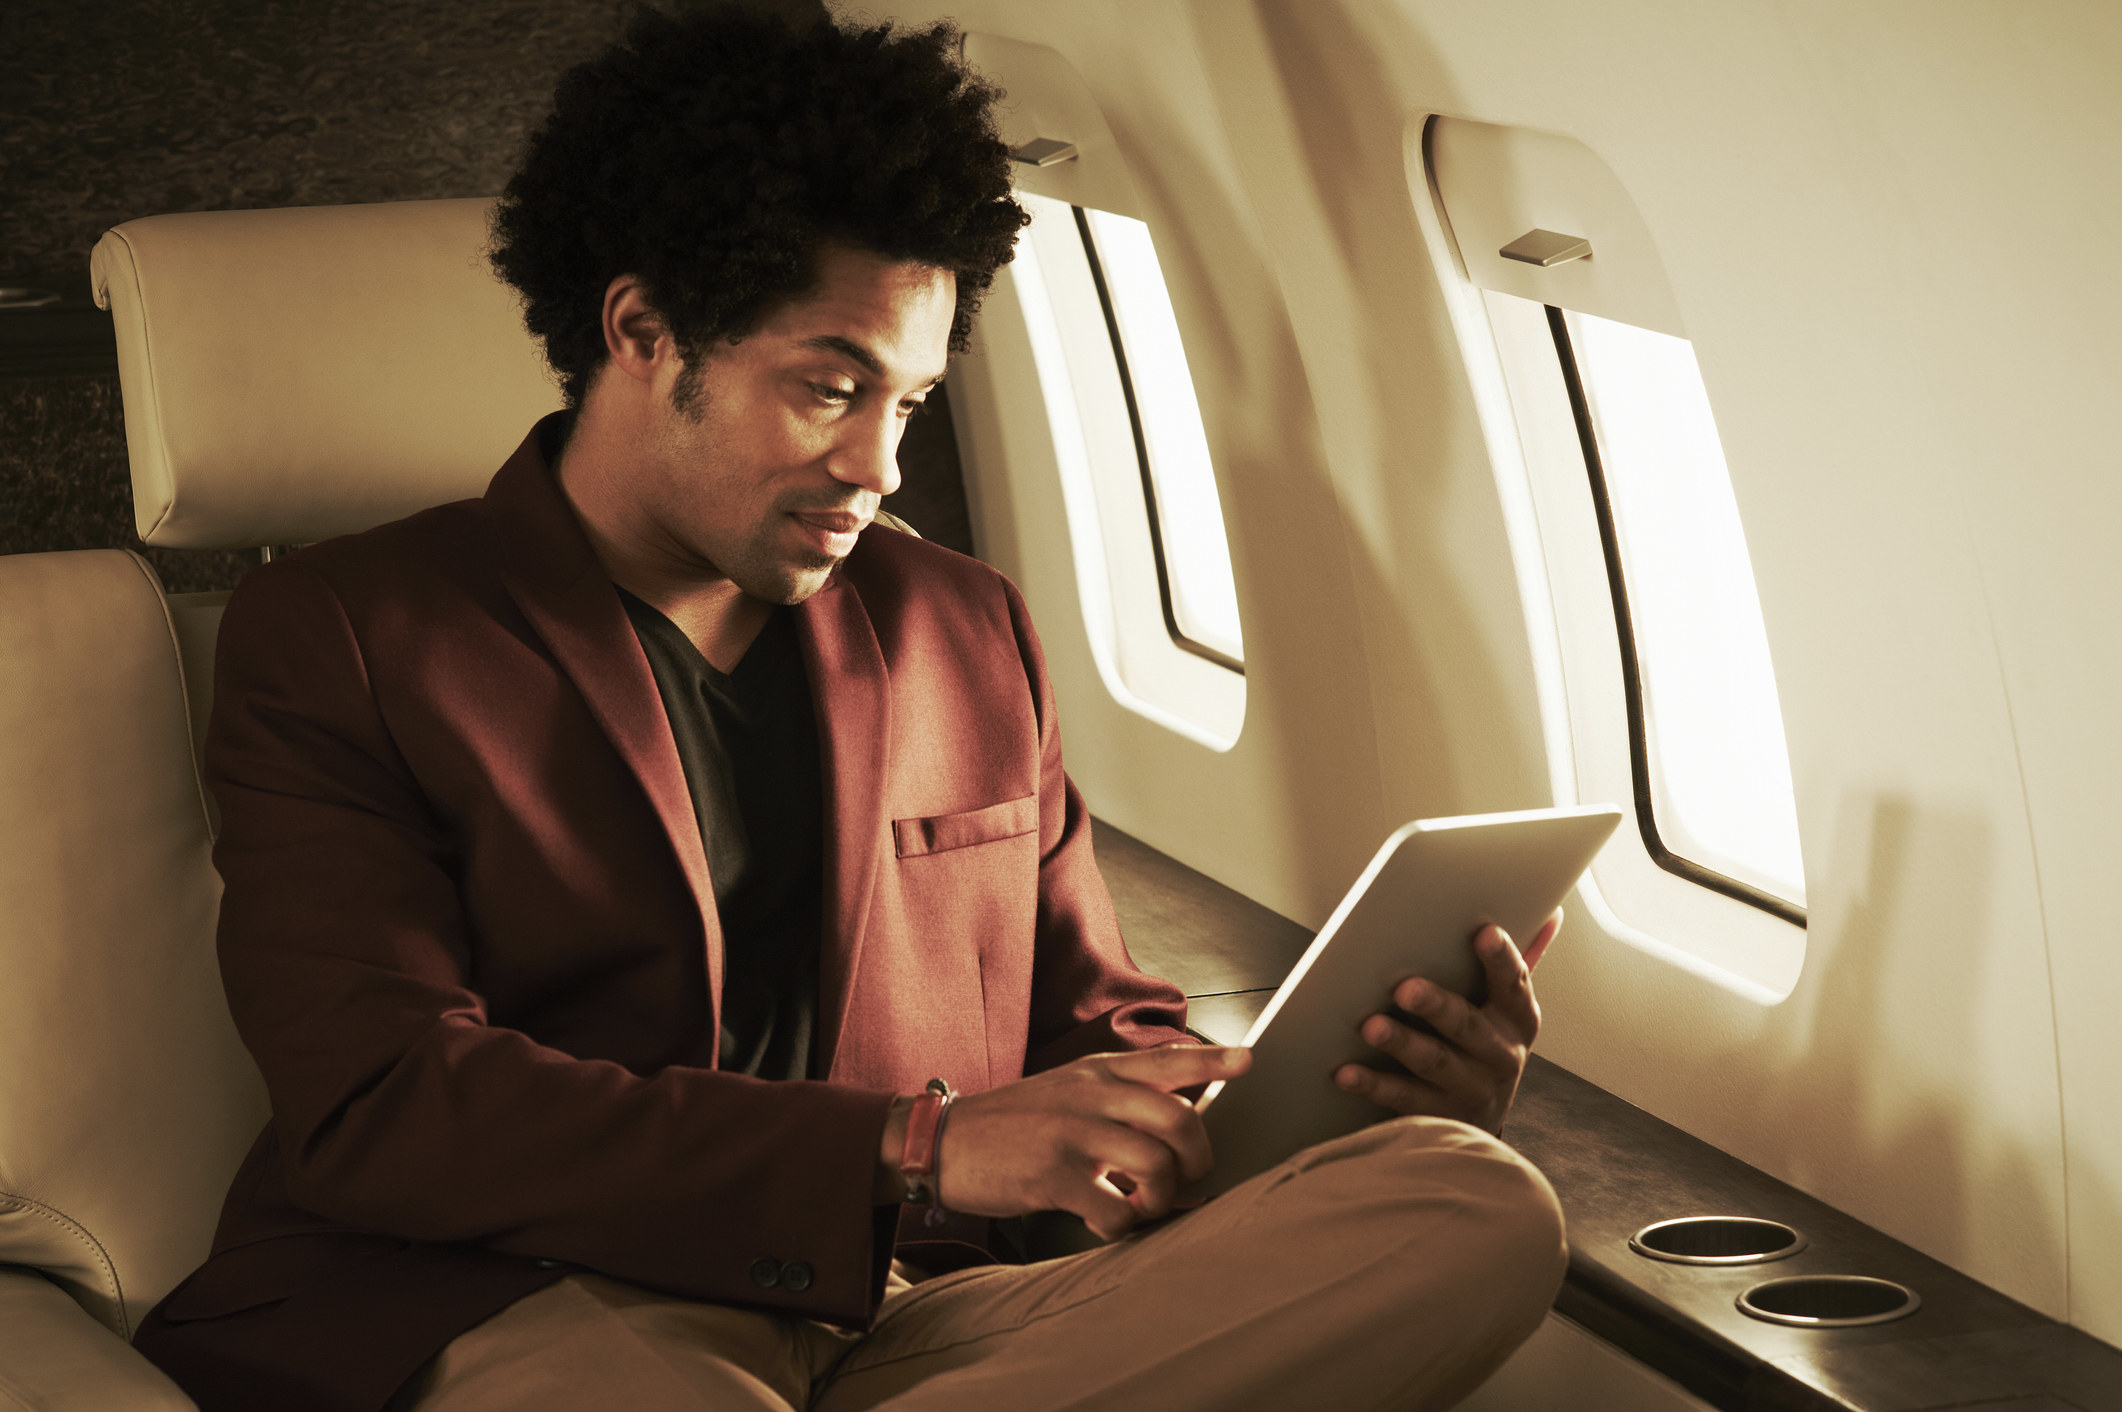 A man using a tablet on a private plane